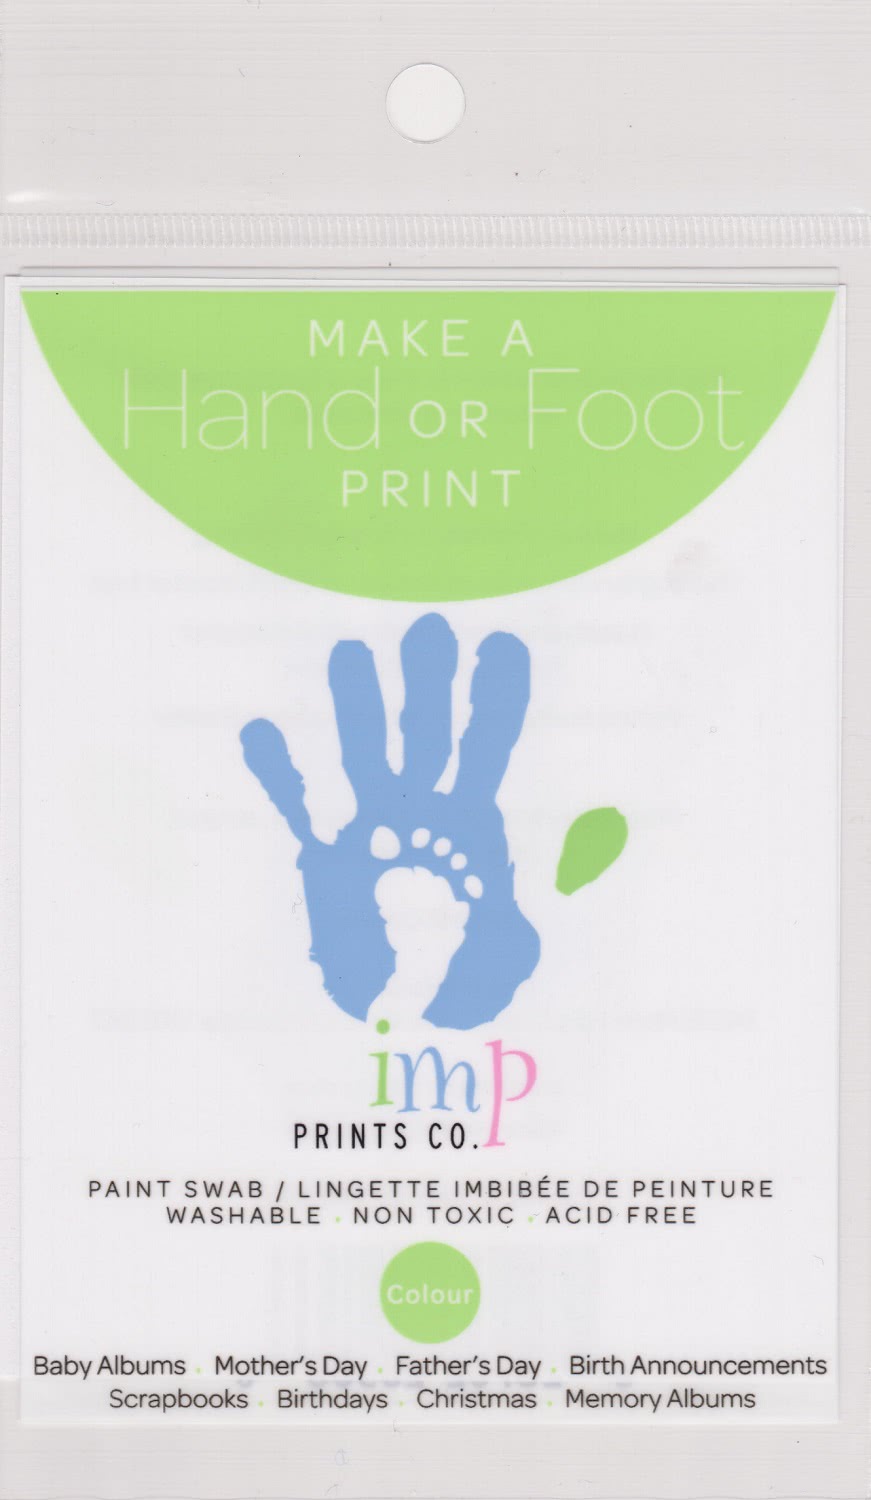 Picture of an Imp Prints co keepsakes for parents paint swab.A plastic pouch printed with "Make a Hand or foot print" Green